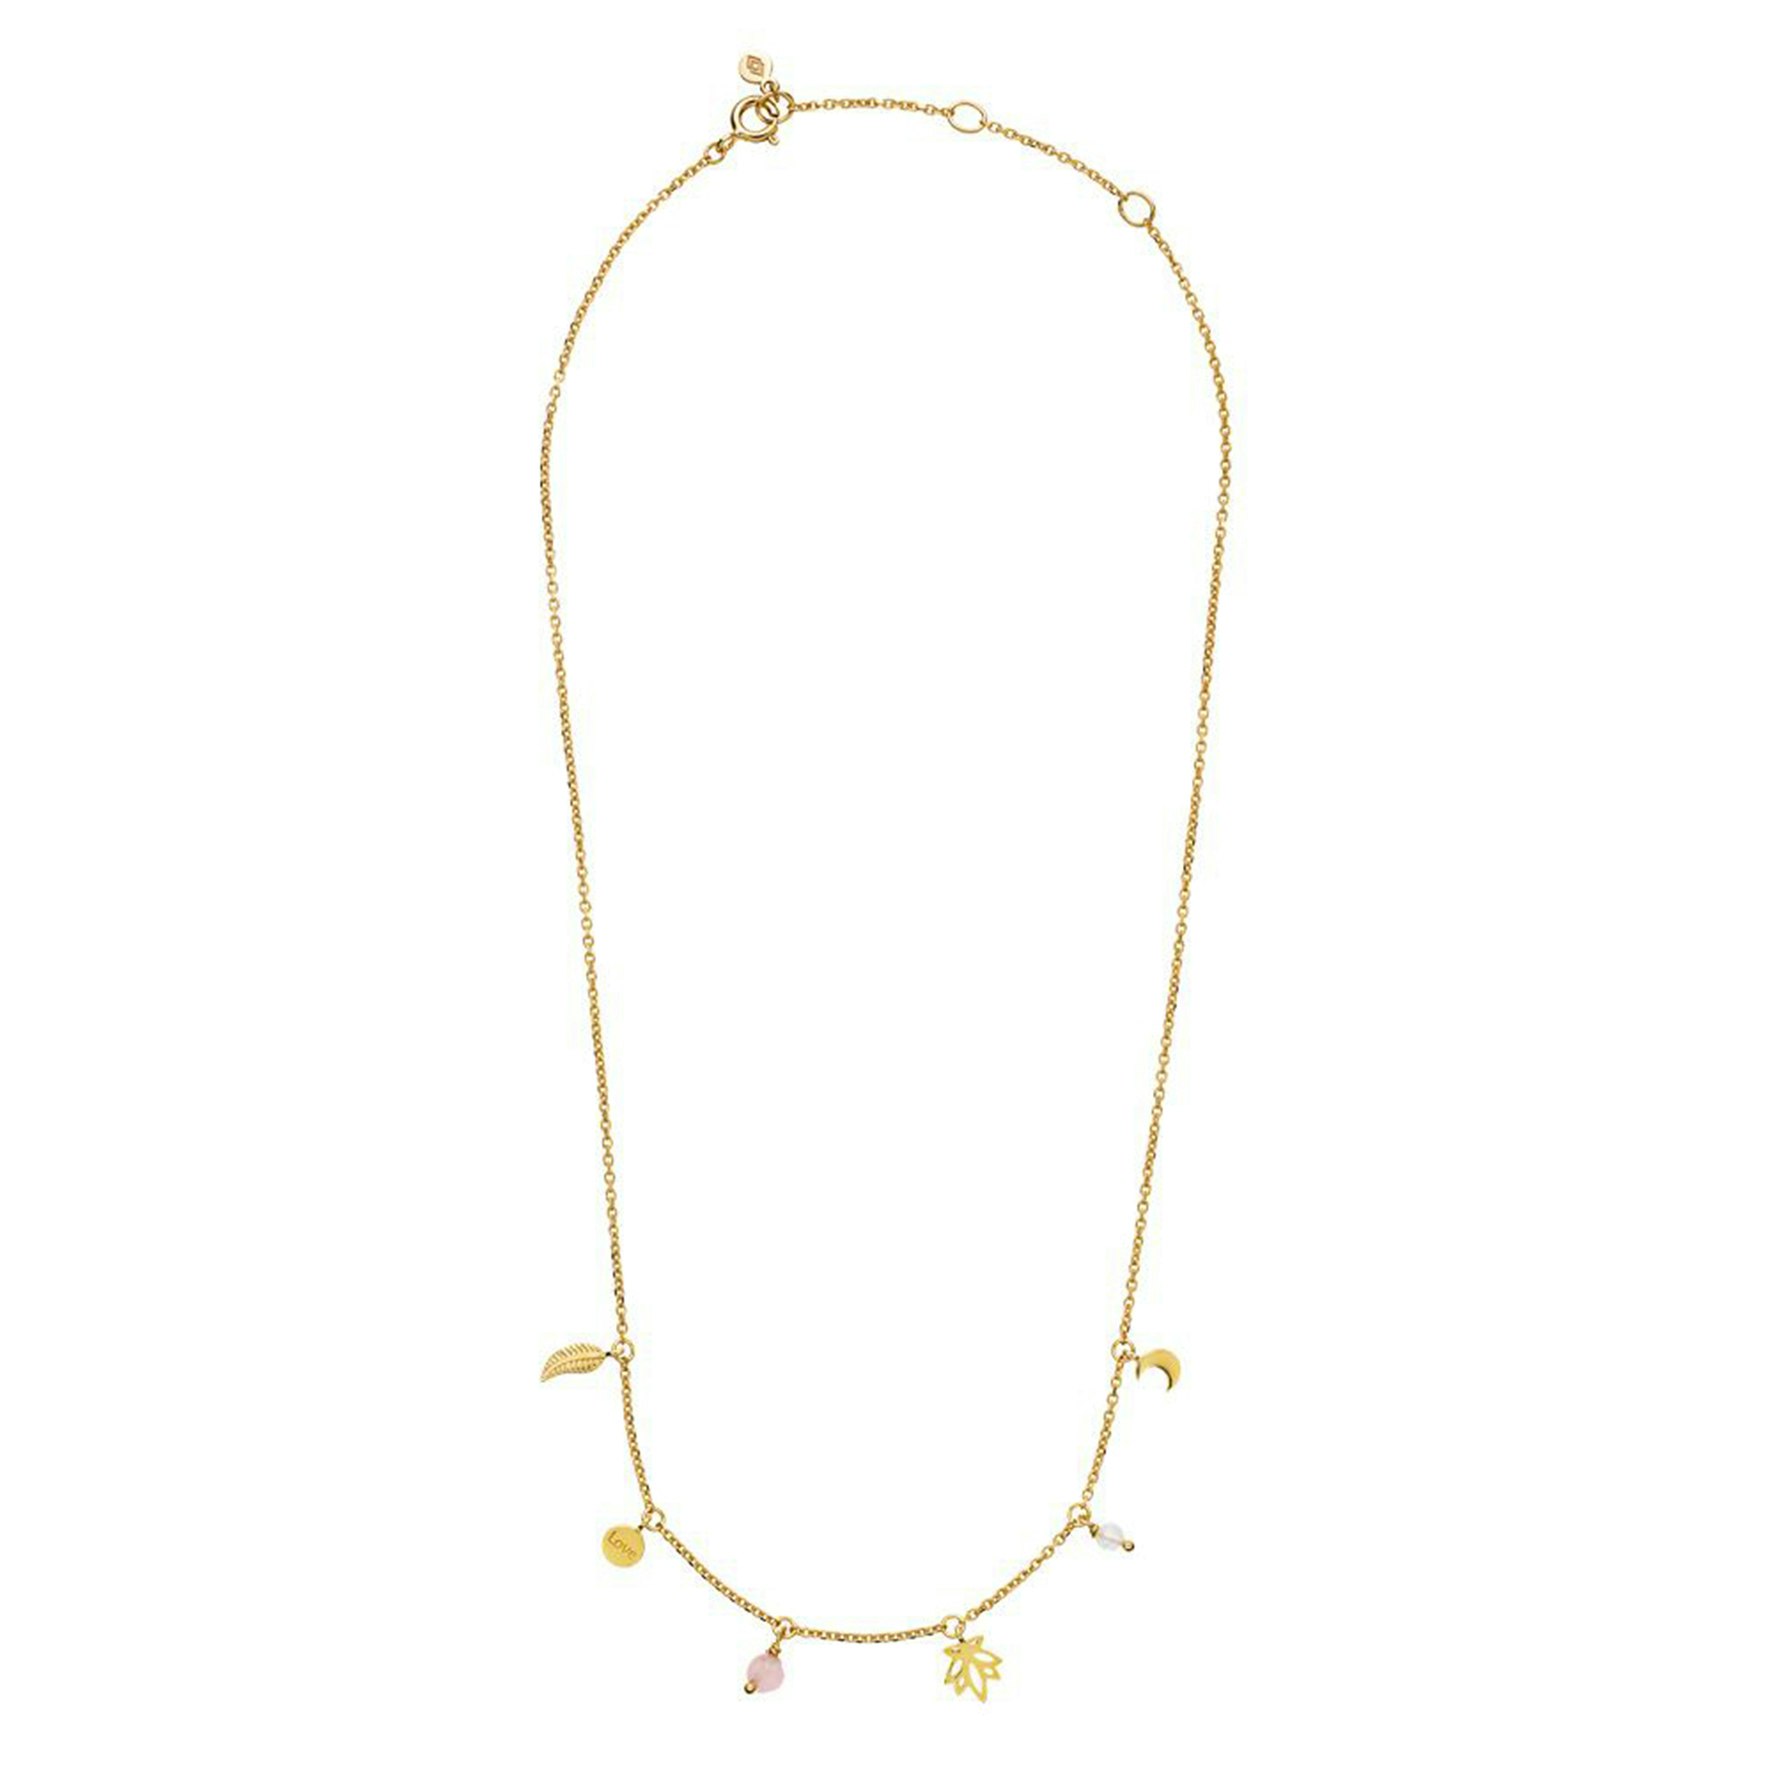 Mie Moltke Necklace from Izabel Camille in Silver Sterling 925